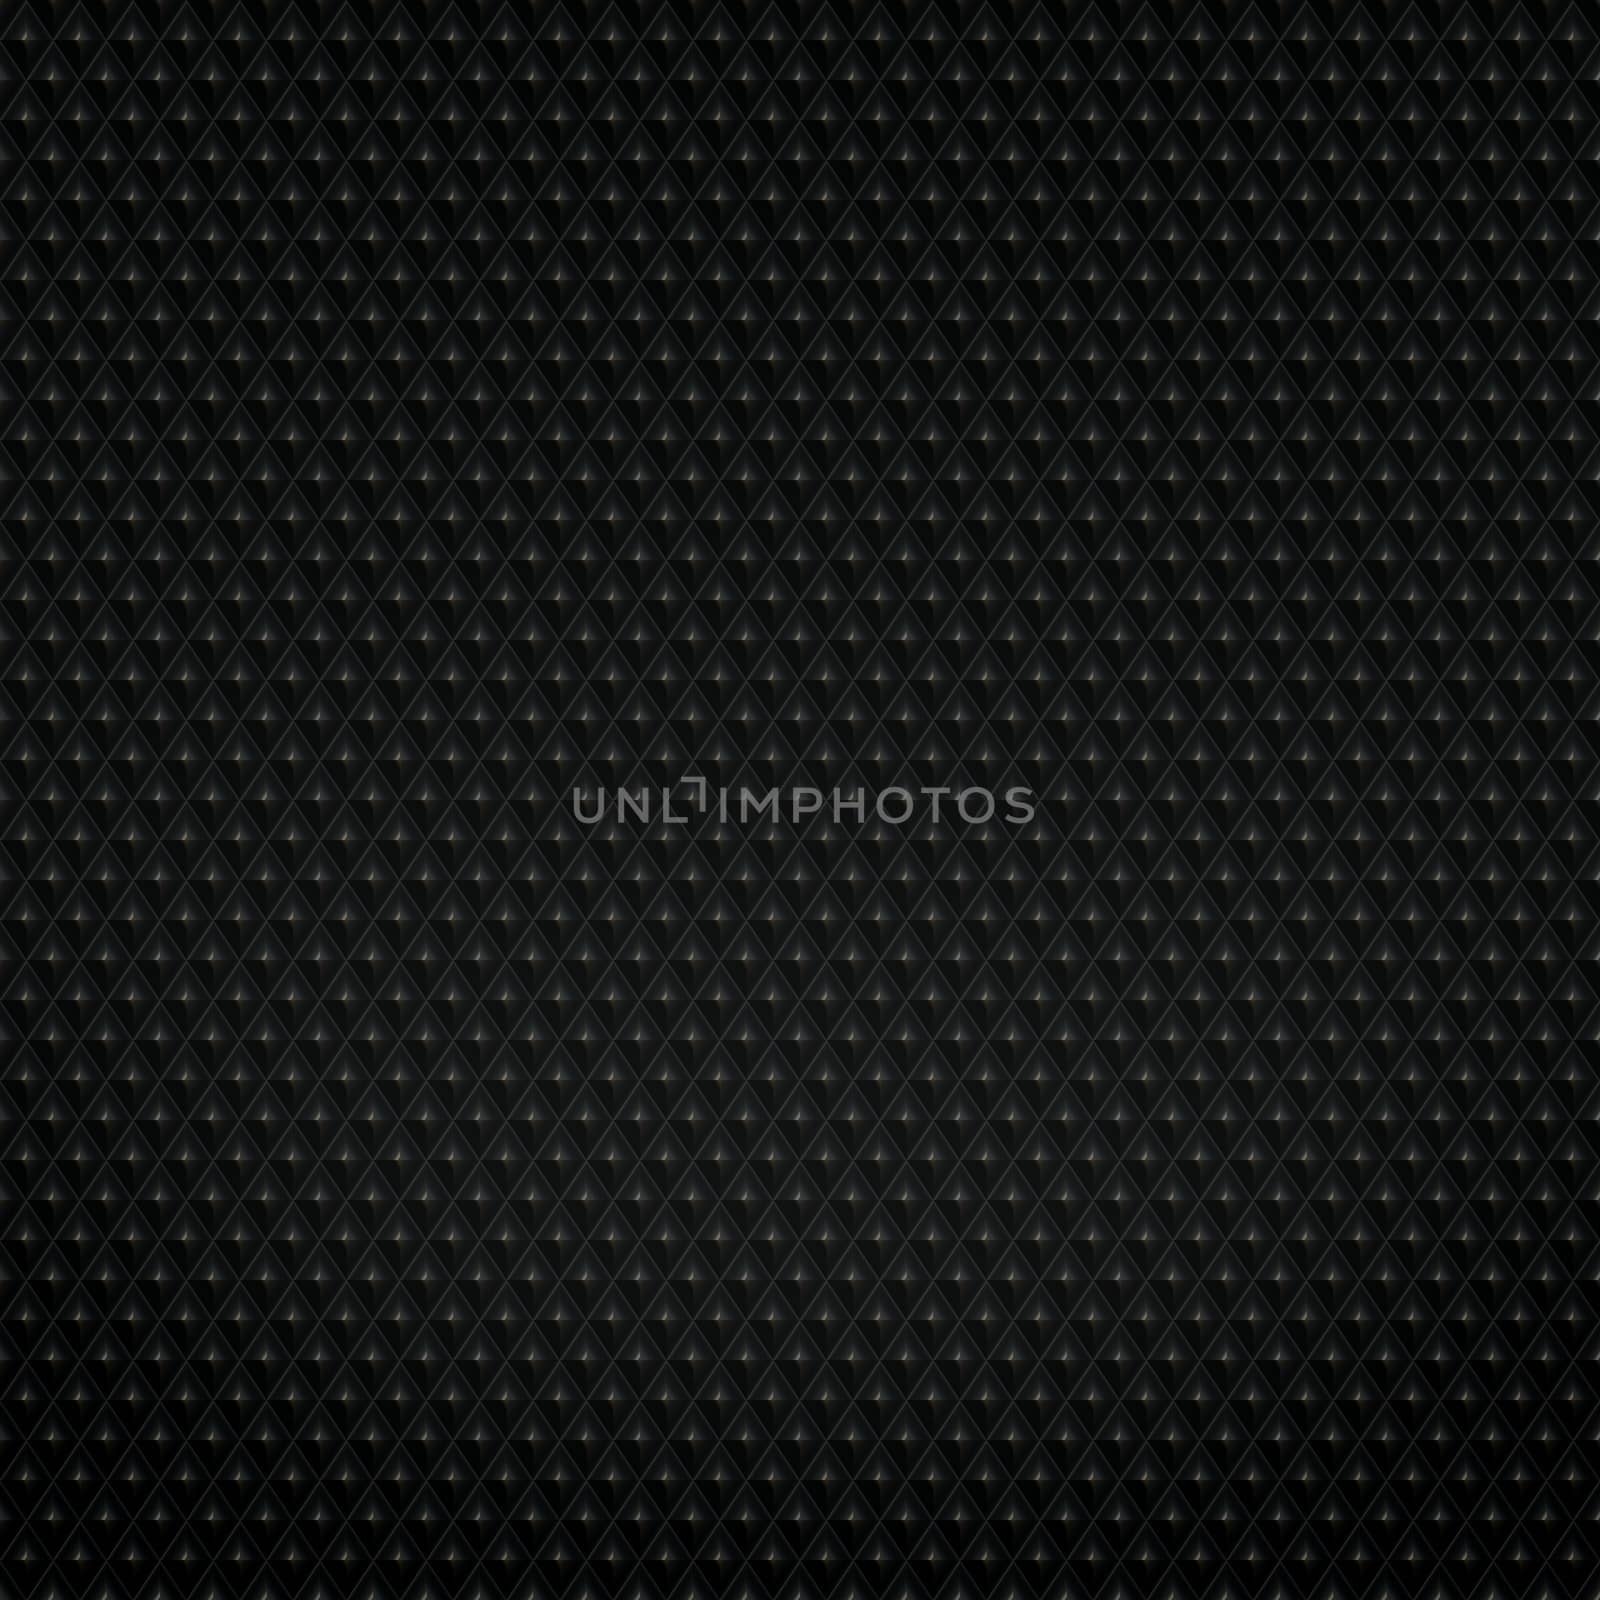 An image of a high detailed black background